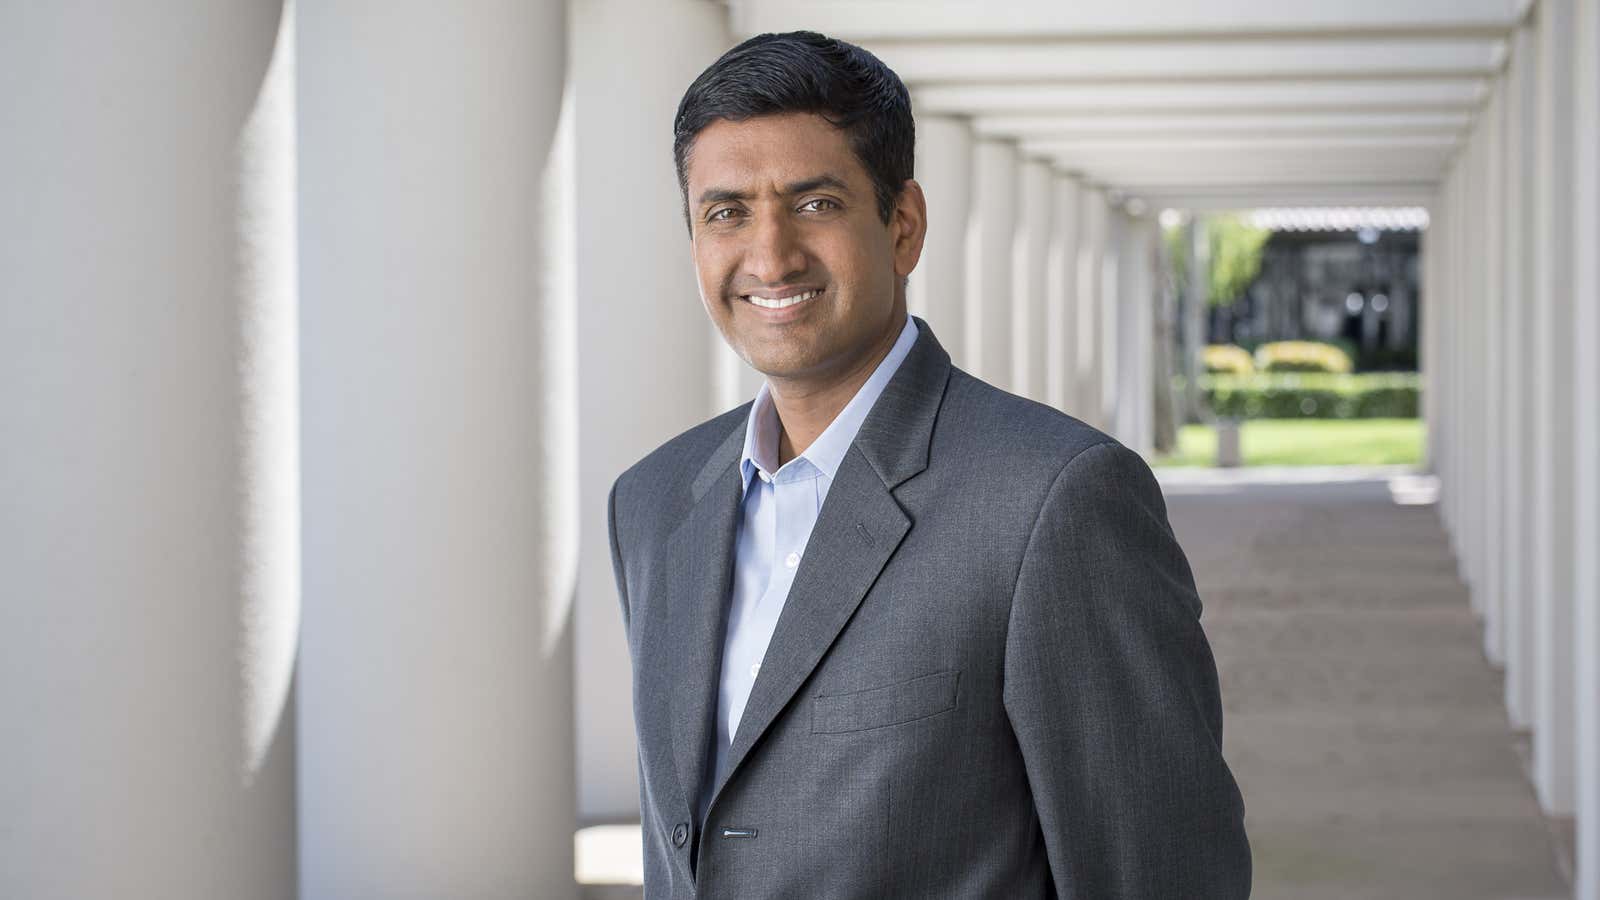 Ro Khanna: Democrat of the future!  (At least according to Silicon Valley.)